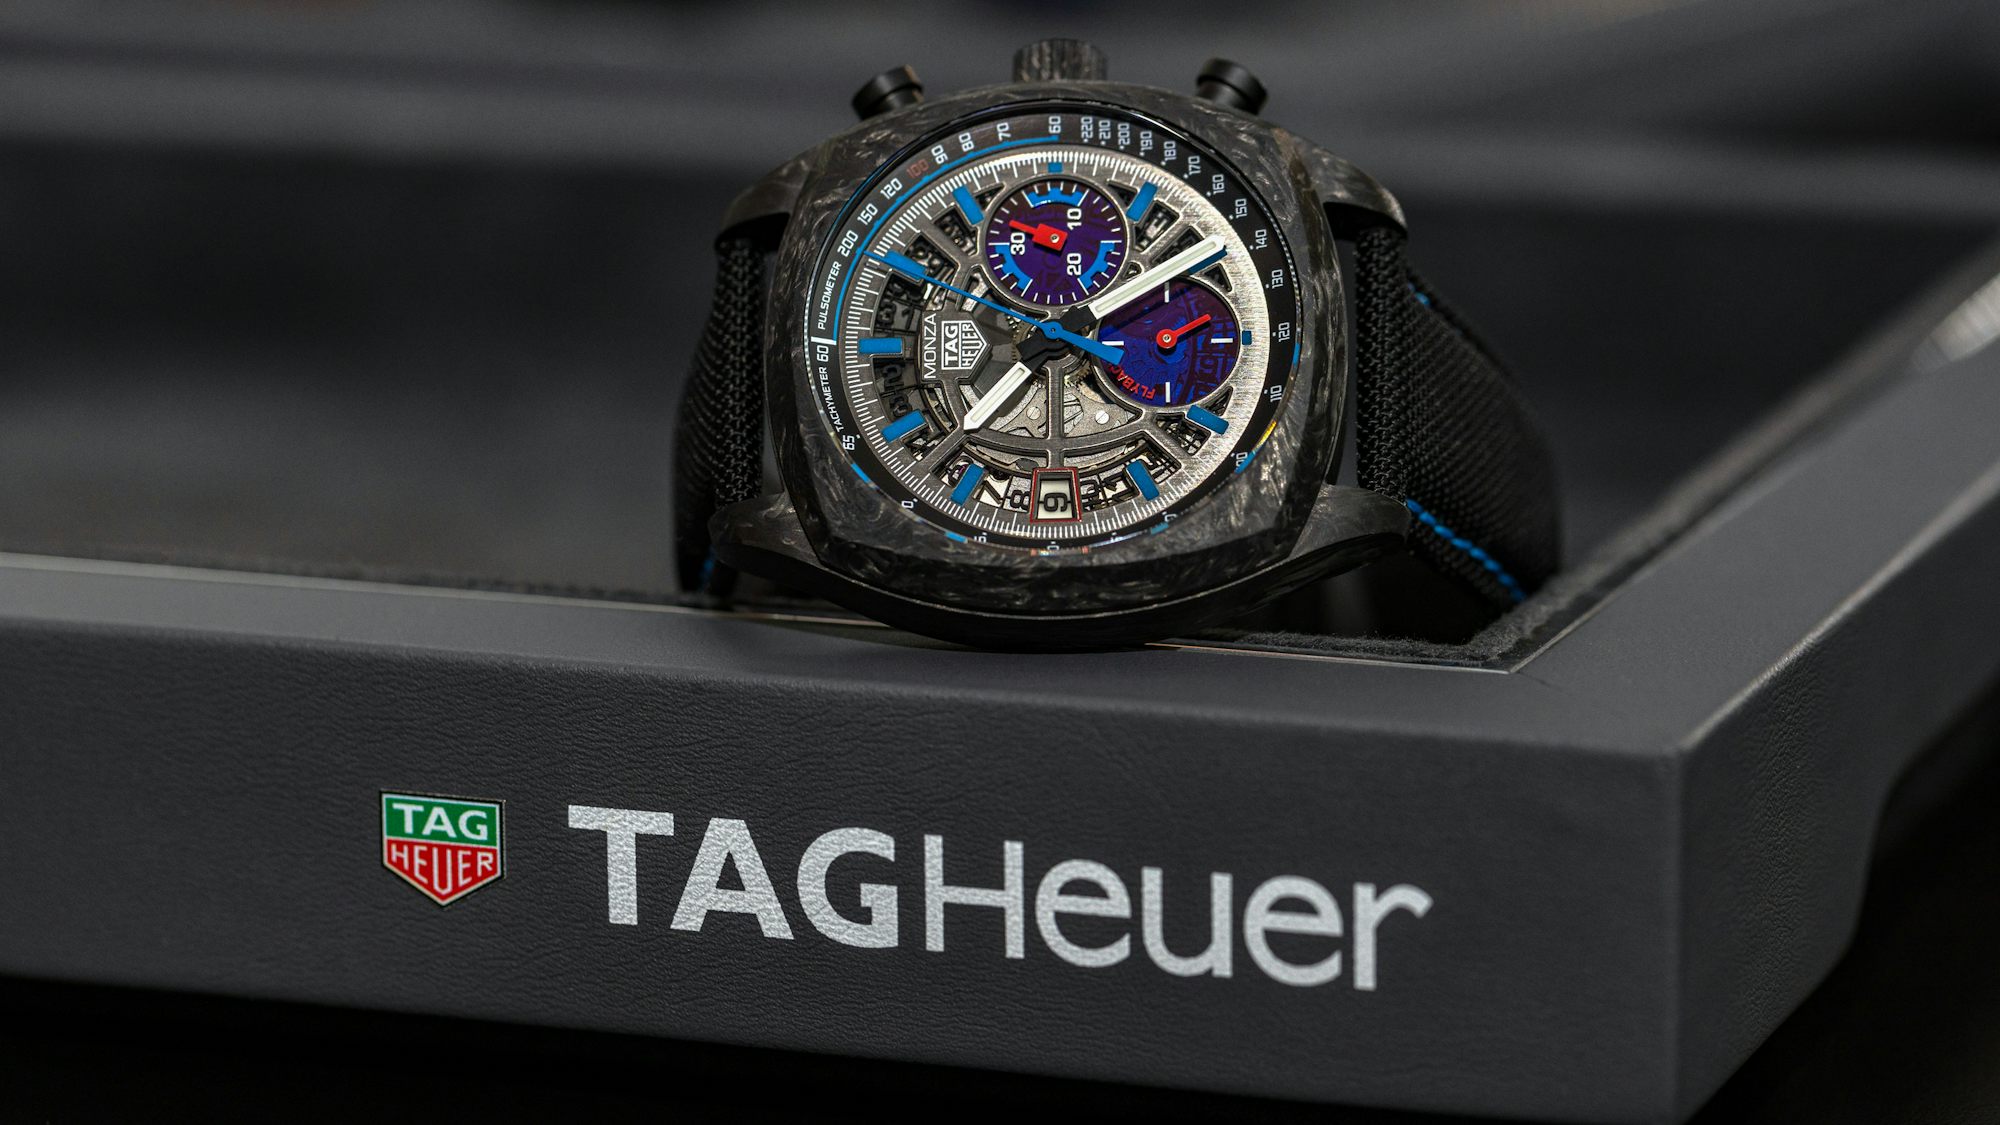 Hands-On: This New Monza Proves Why You Should Give Hyper-Modern TAG Heuer A Chance